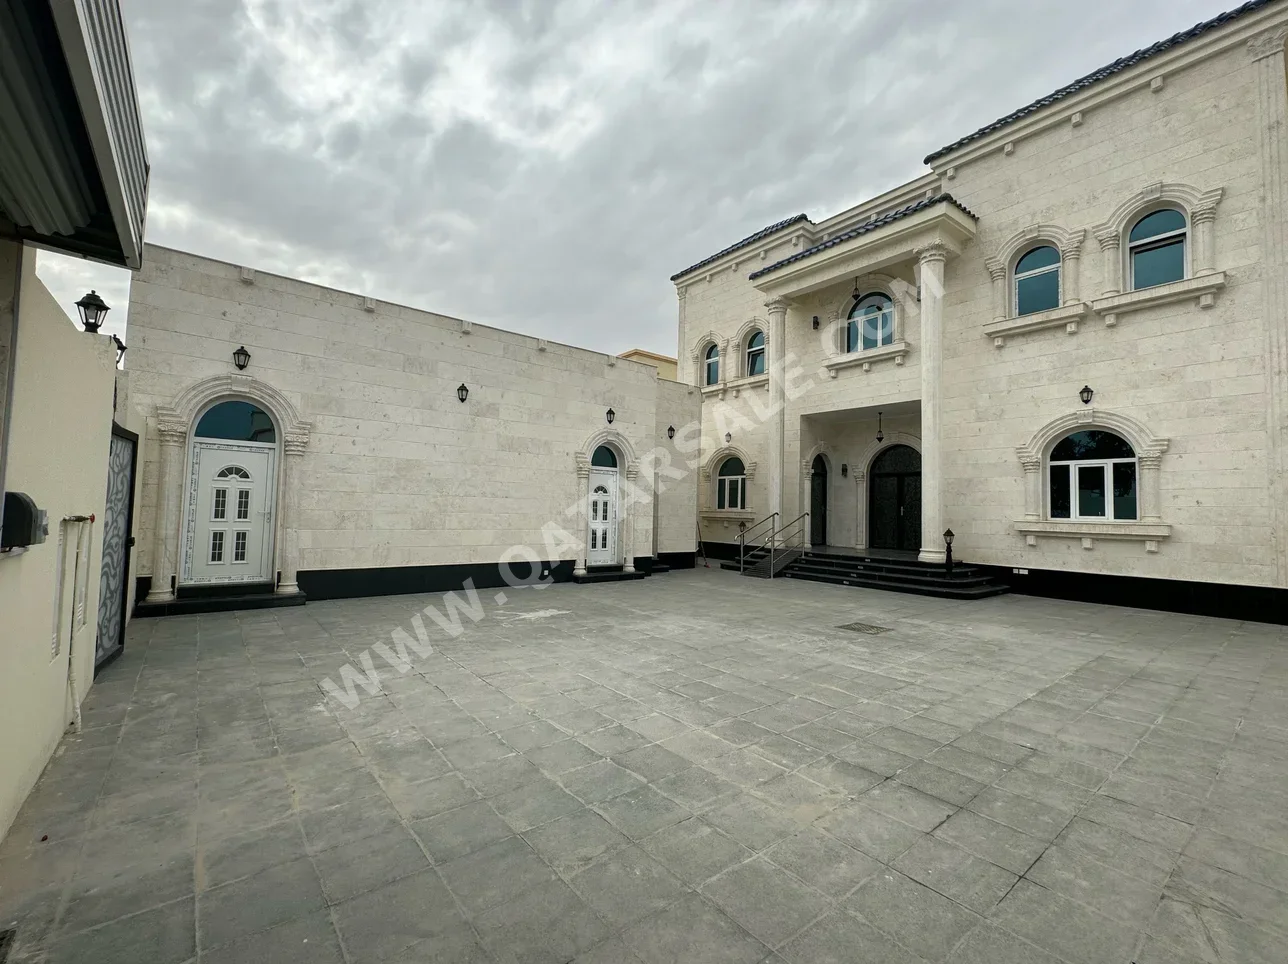 Family Residential  Not Furnished  Al Daayen  Al Sakhama  7 Bedrooms  Includes Water & Electricity